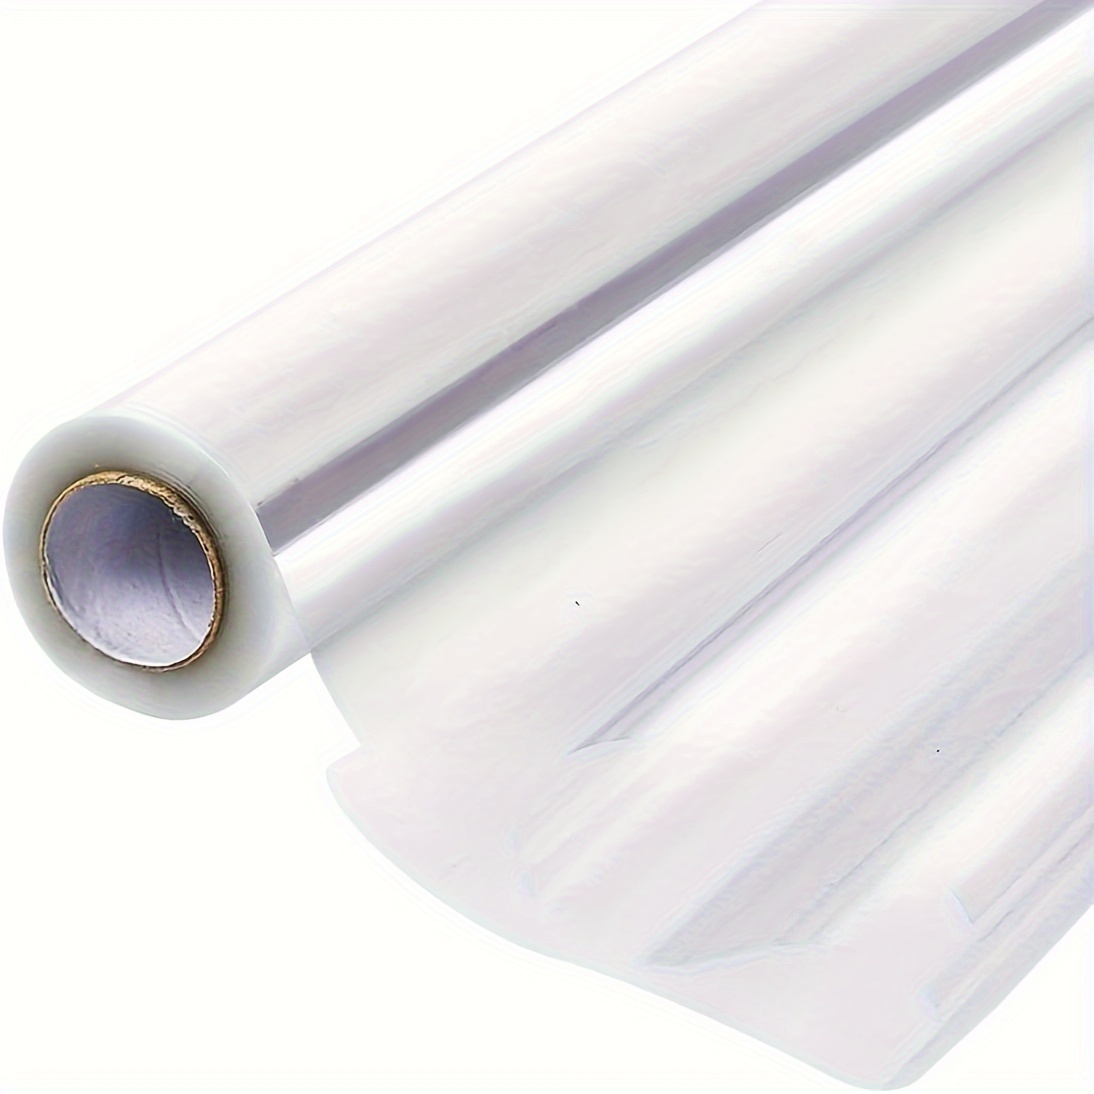 1pc Cellophane Wrap Roll Clear Cellophane Paper Gift Wrapping